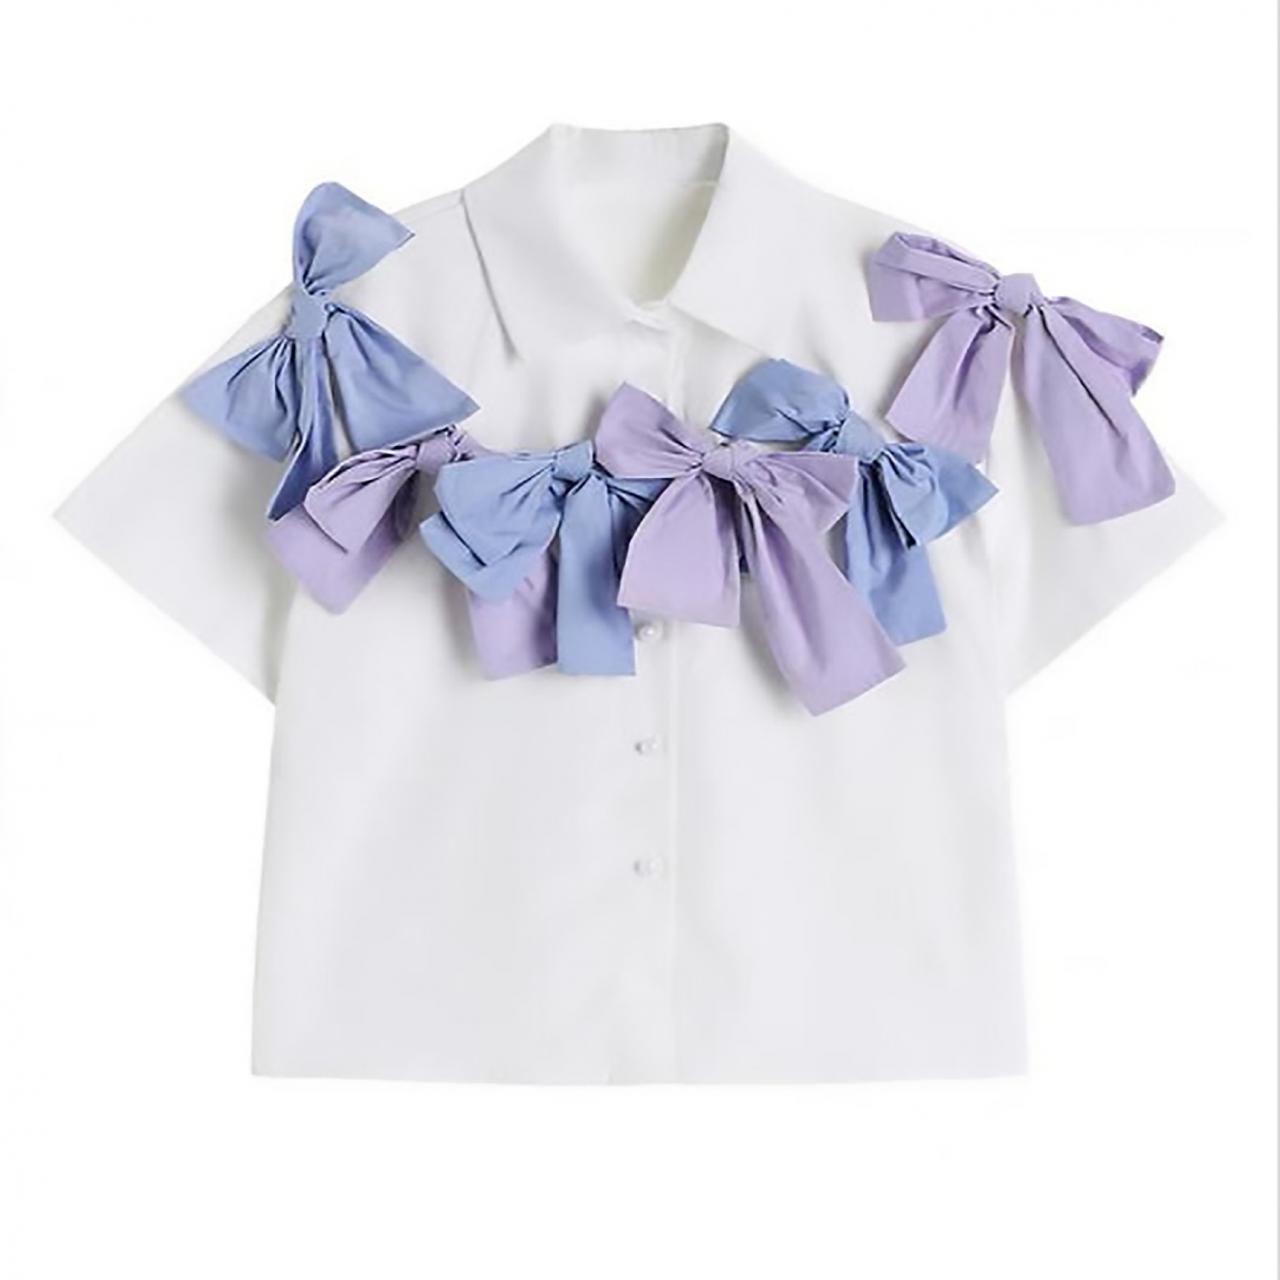 Fashion, Blue And Purple Bow, White Short-sleeved Shirt, Chic Top, Unique Shirt